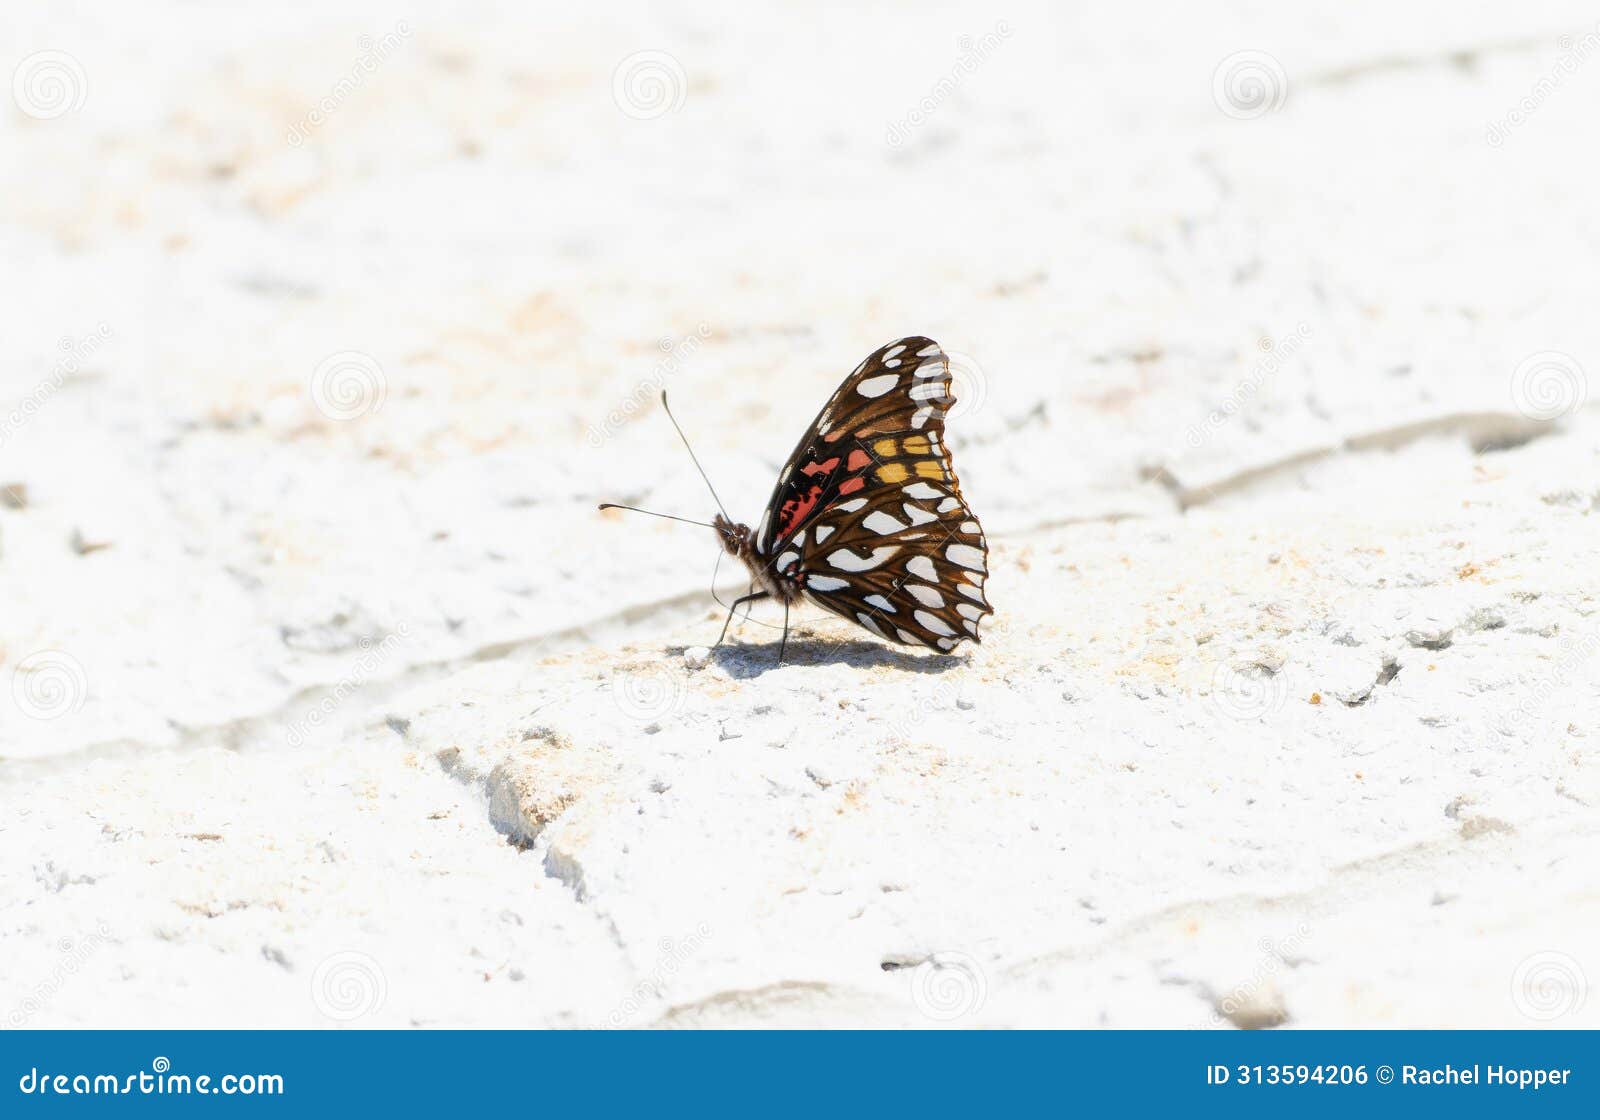 a mexican silverspot, dione moneta, butterfly rests on the ground, absorbing the warm sunlight in mexico